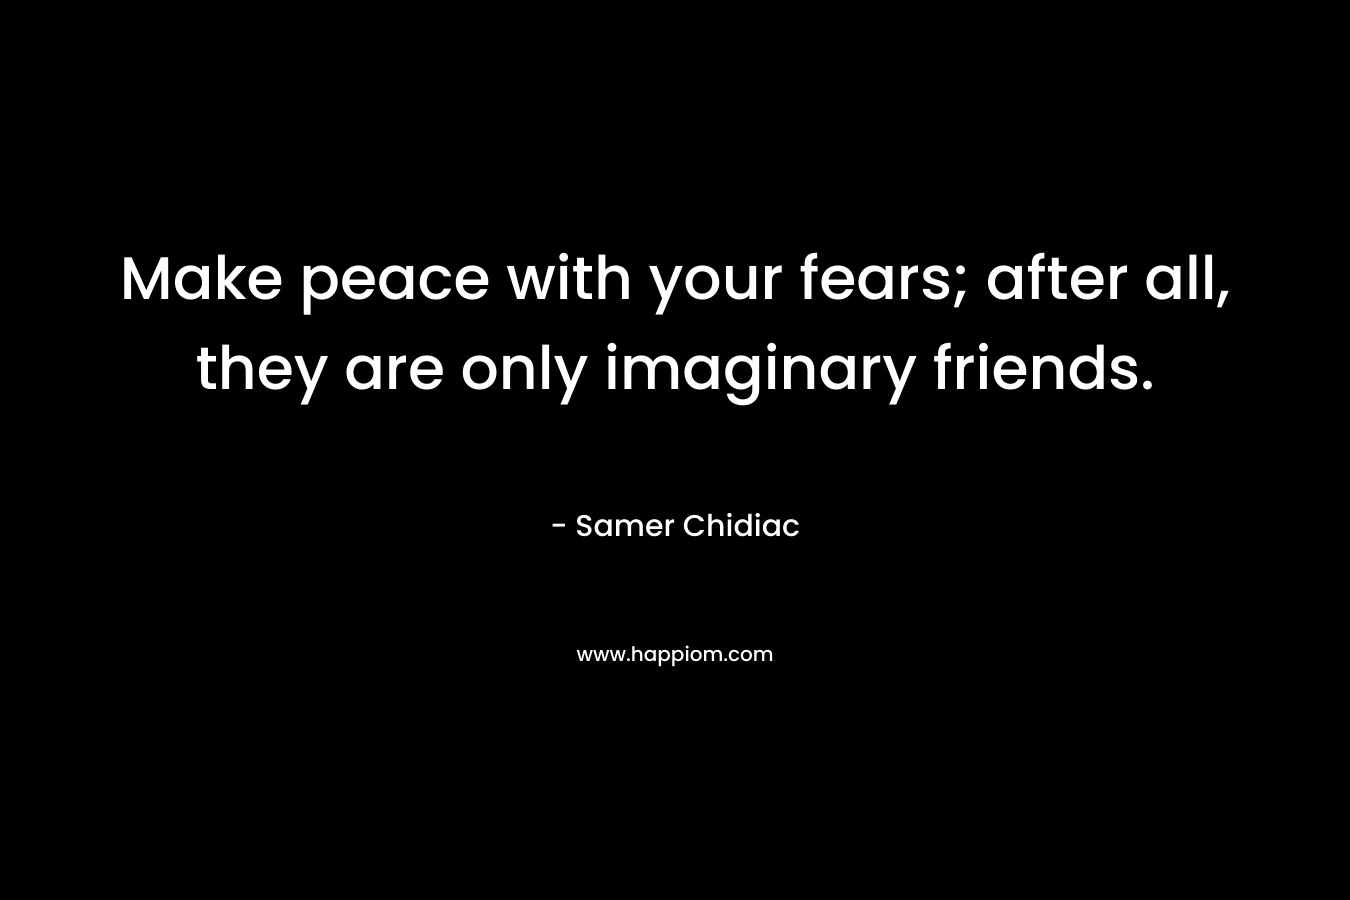 Make peace with your fears; after all, they are only imaginary friends. – Samer Chidiac